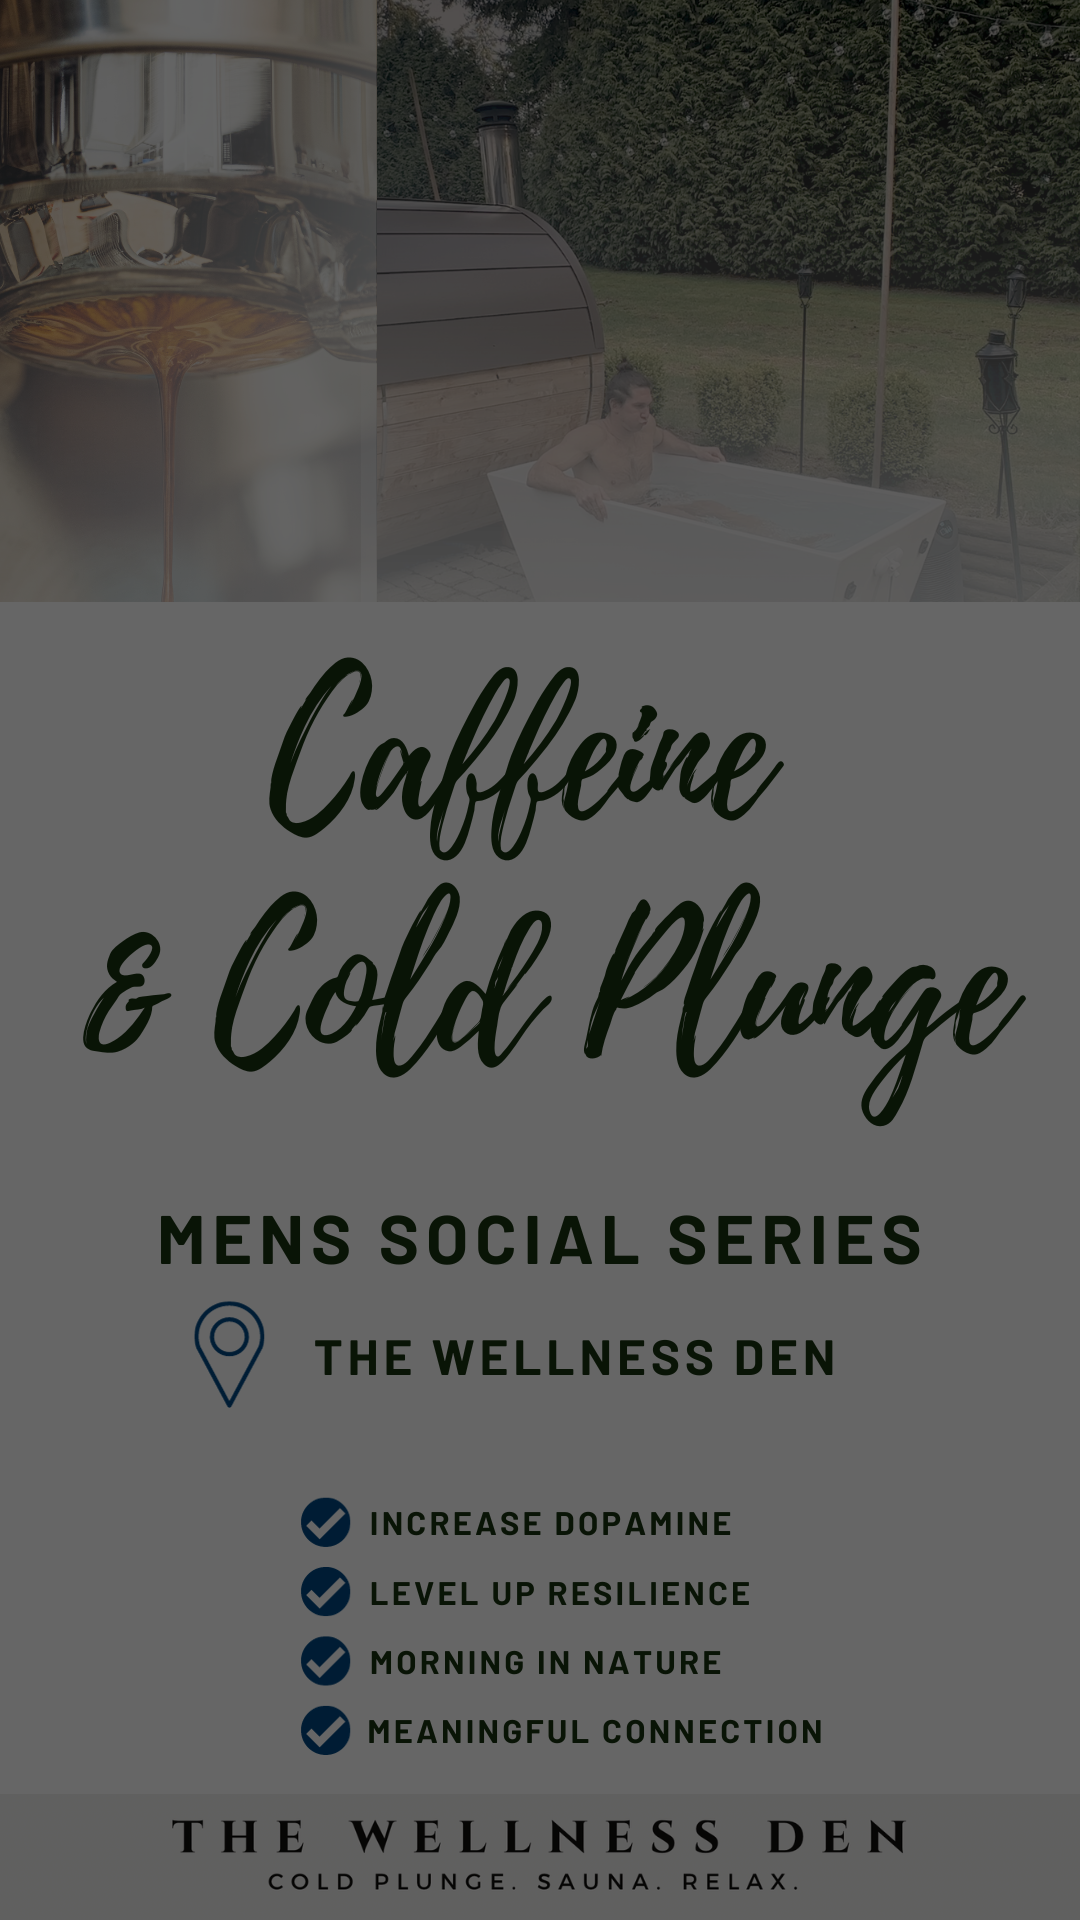 Sauna, cold plunge, coffee, and mens community in Fort Langley, BC at The Wellness Den